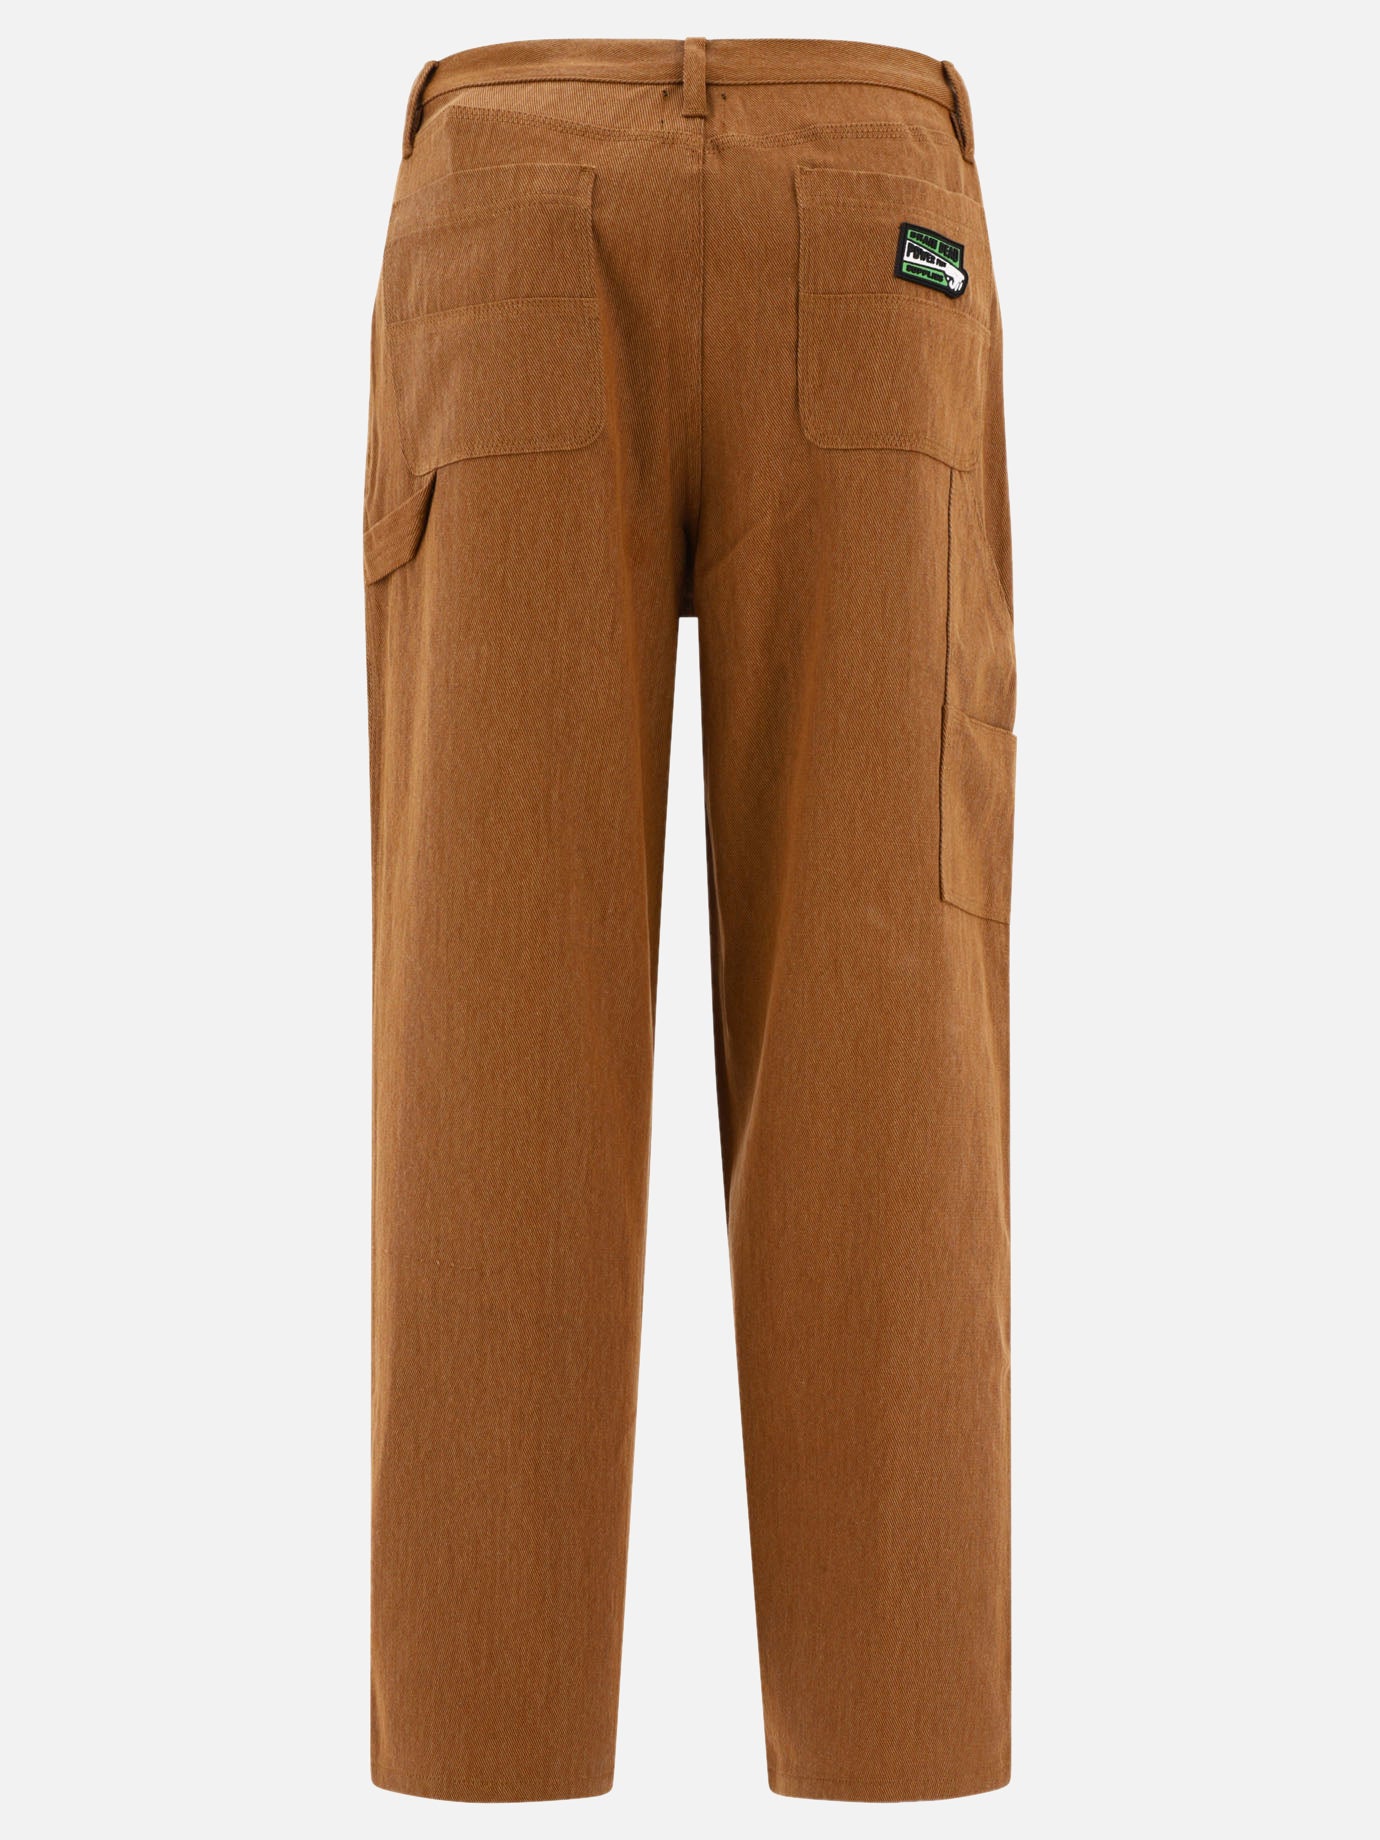 "Bull Double Knee" trousers